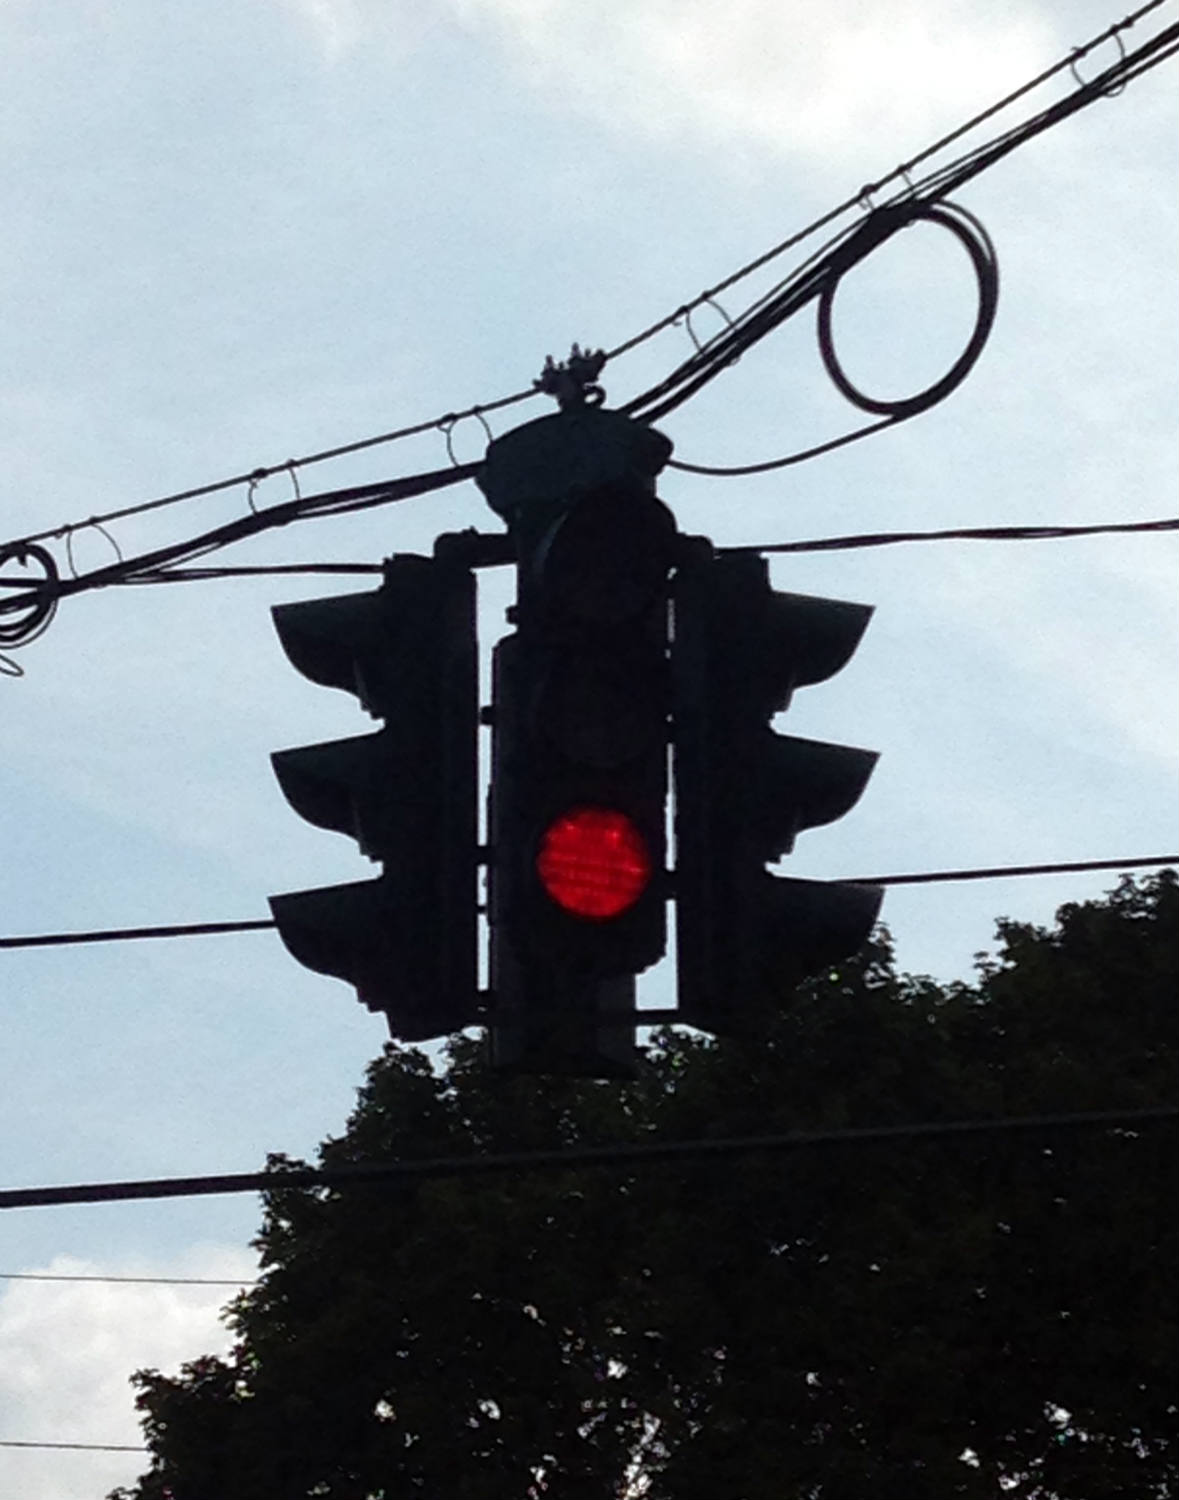 Upside Down Traffic Signal in Tipperary Hill - Syracuse, NY